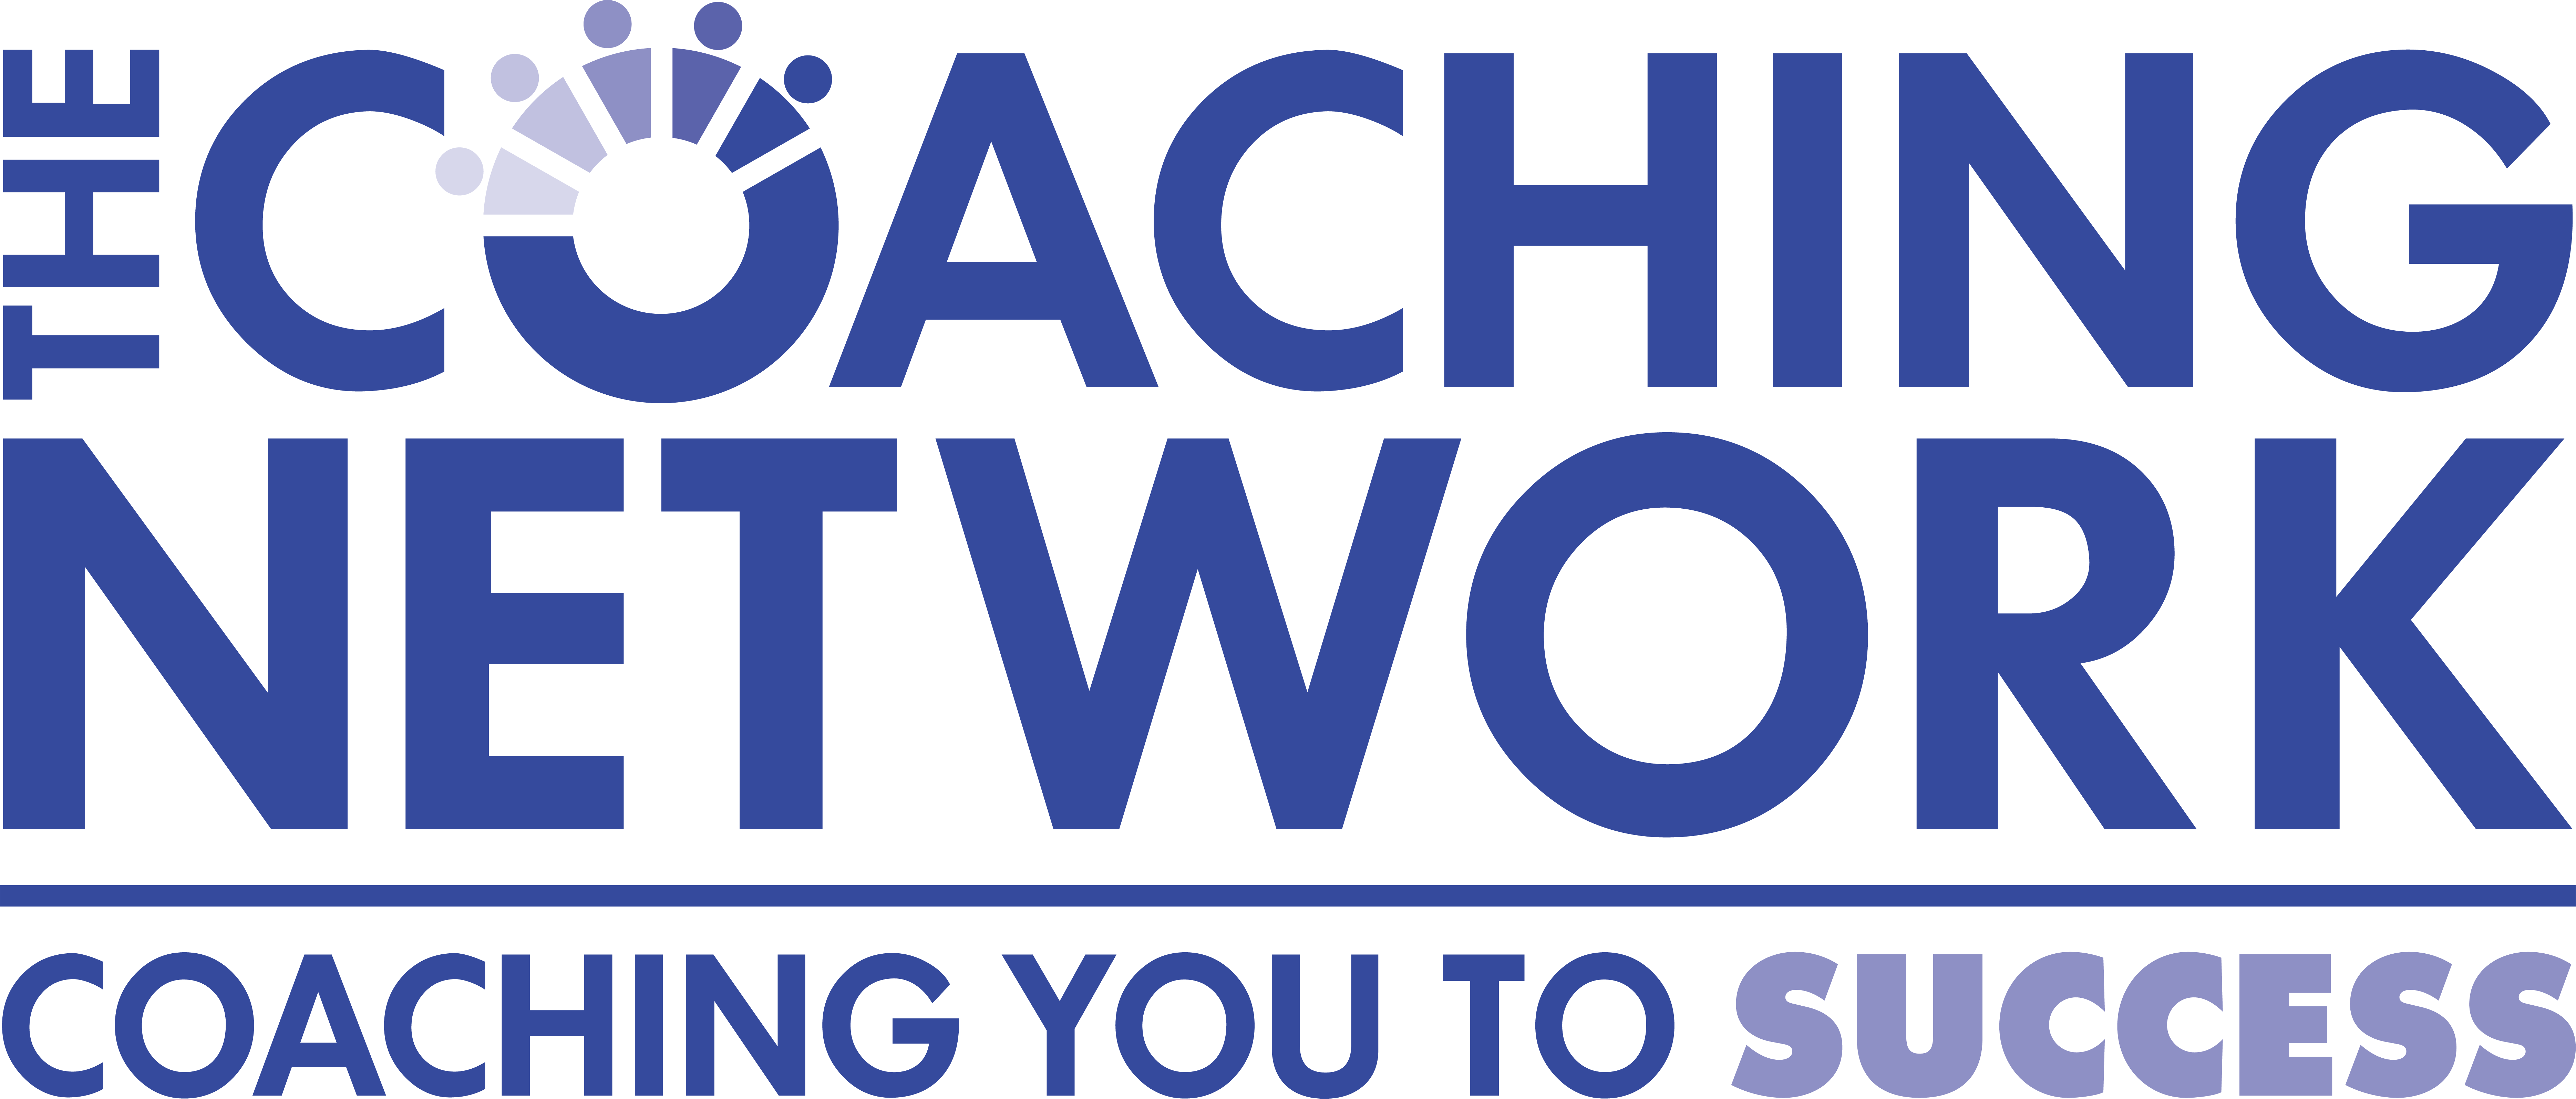 The Coaching Network